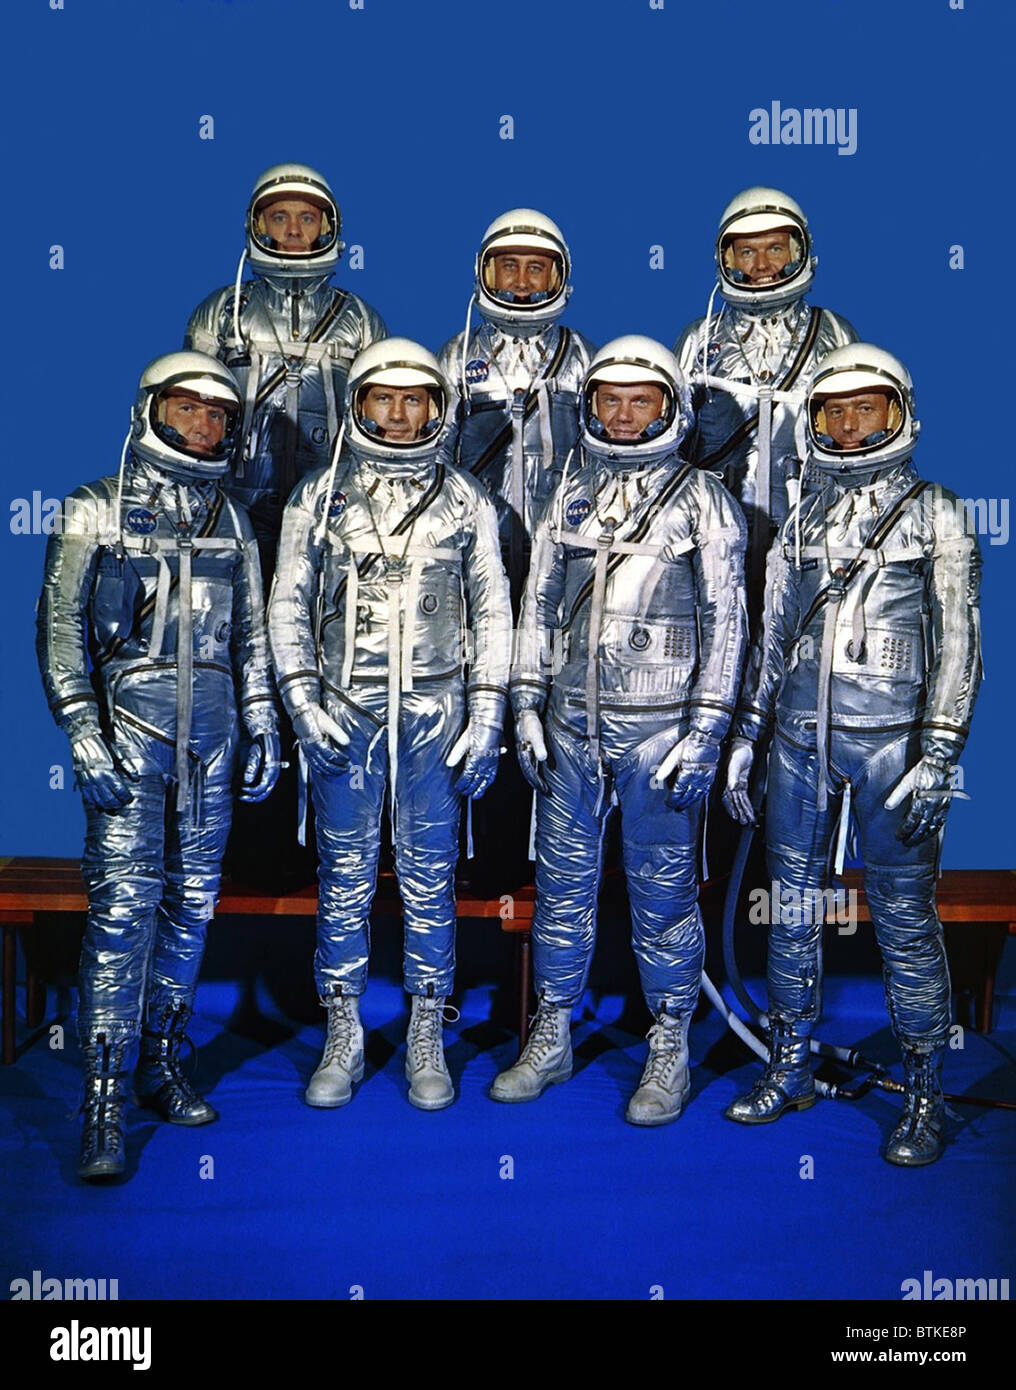 Project Mercury astronauts in their space suits. Front row, left to right, Walter H. Schirra Jr., Donald K. Slayton, John H. Glenn Jr., and Scott Carpenter; back row, Alan B. Shepard Jr., Gus Grissom, and L. Gordon Cooper. 1959. Stock Photo